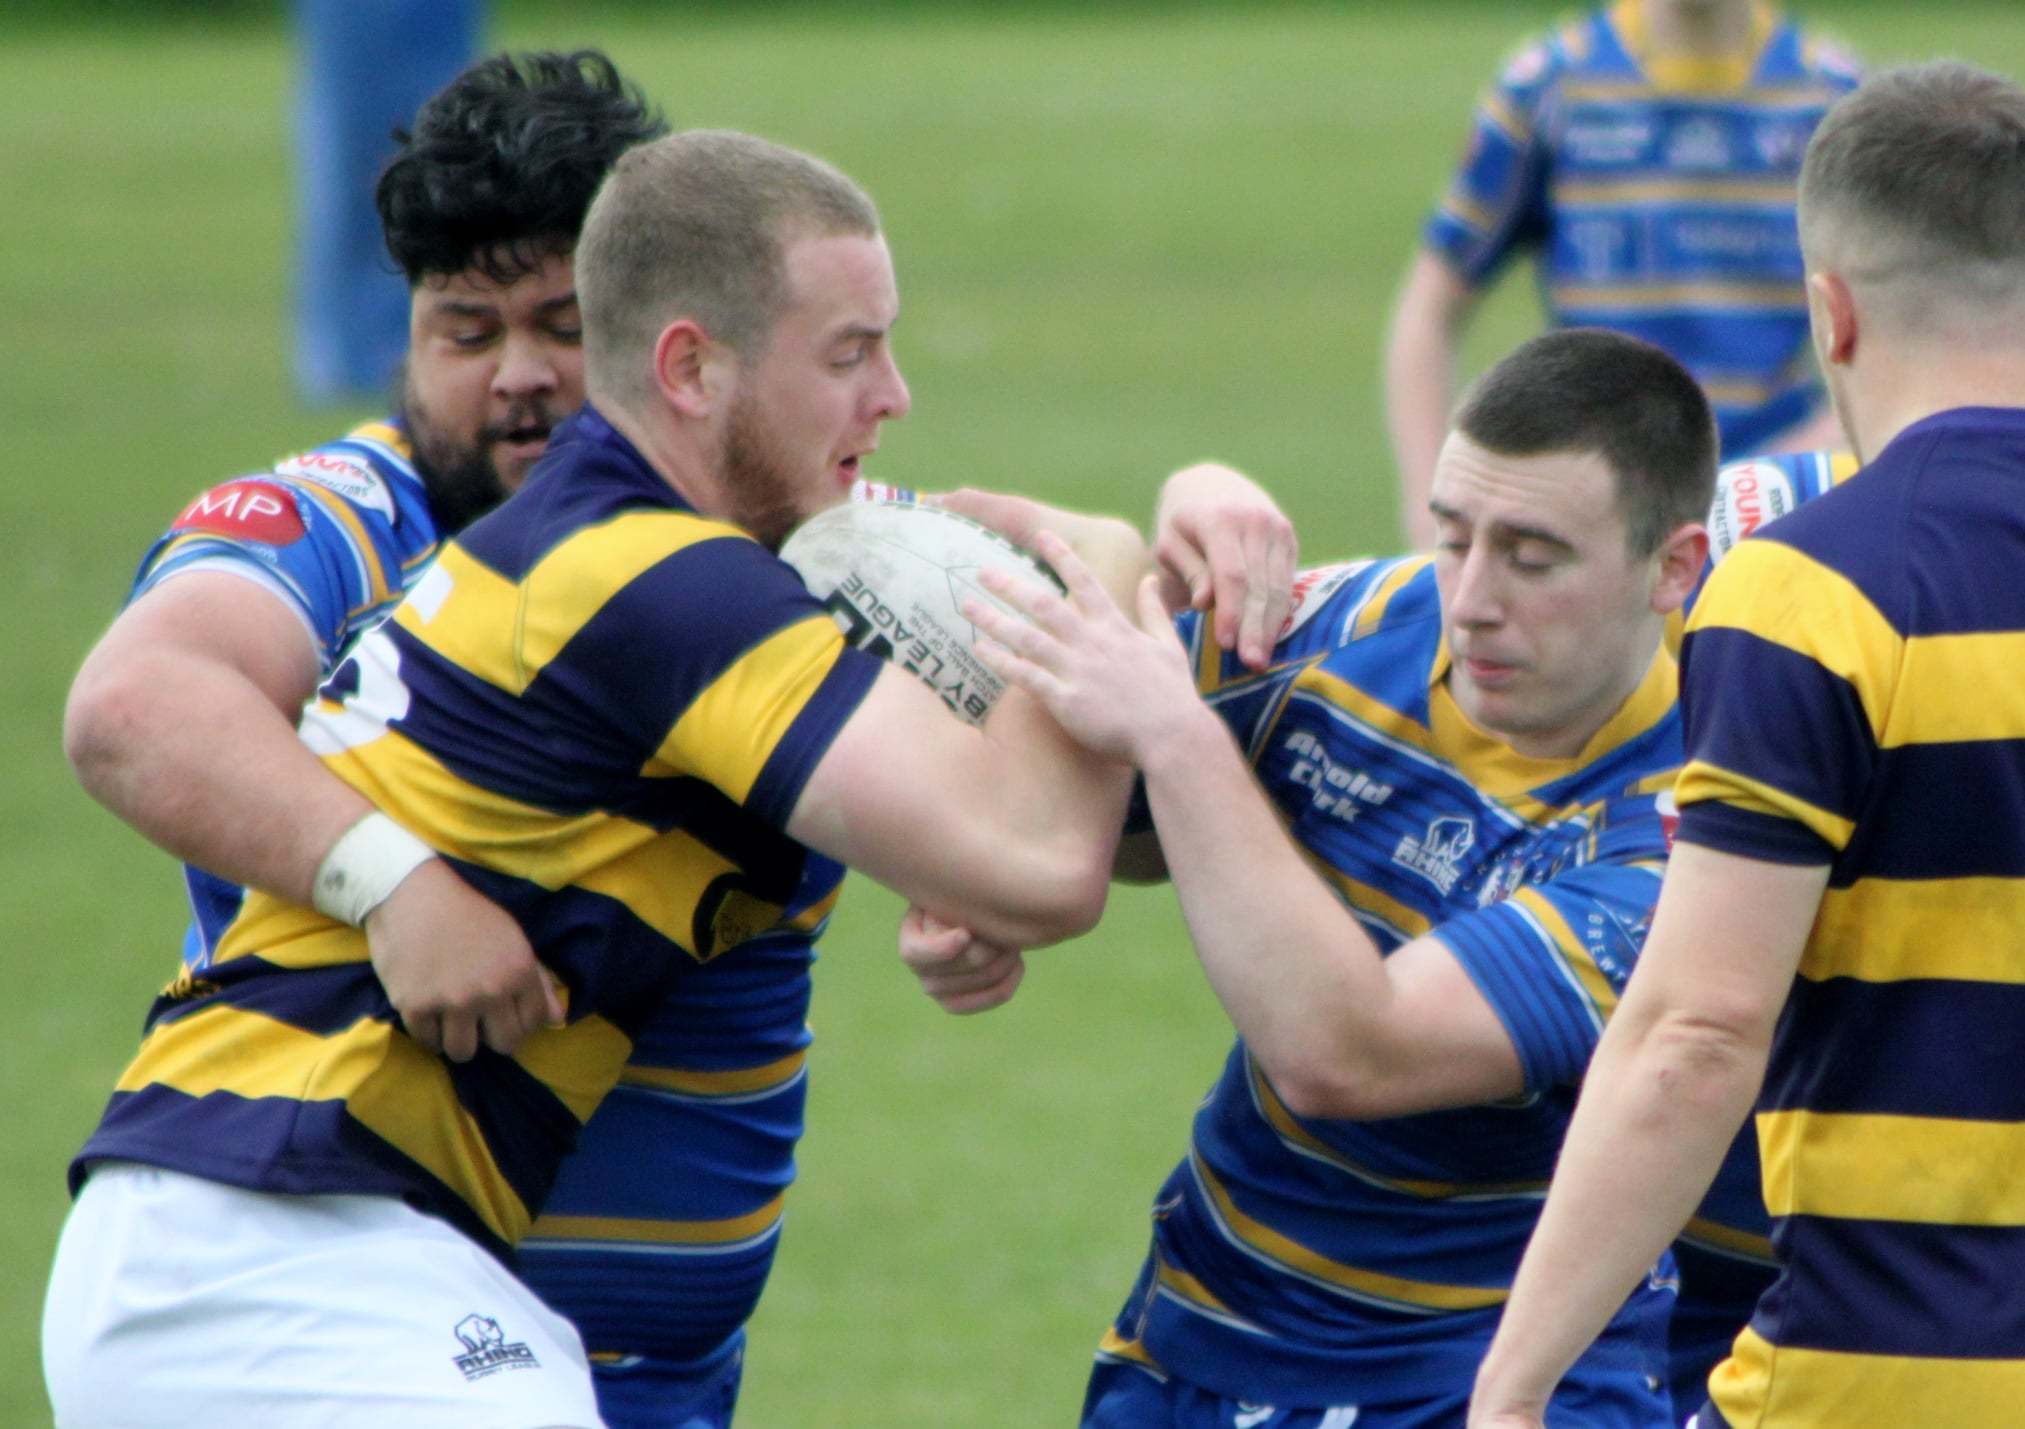 A young Crosfields side were beaten at Clock Face Miners on Saturday